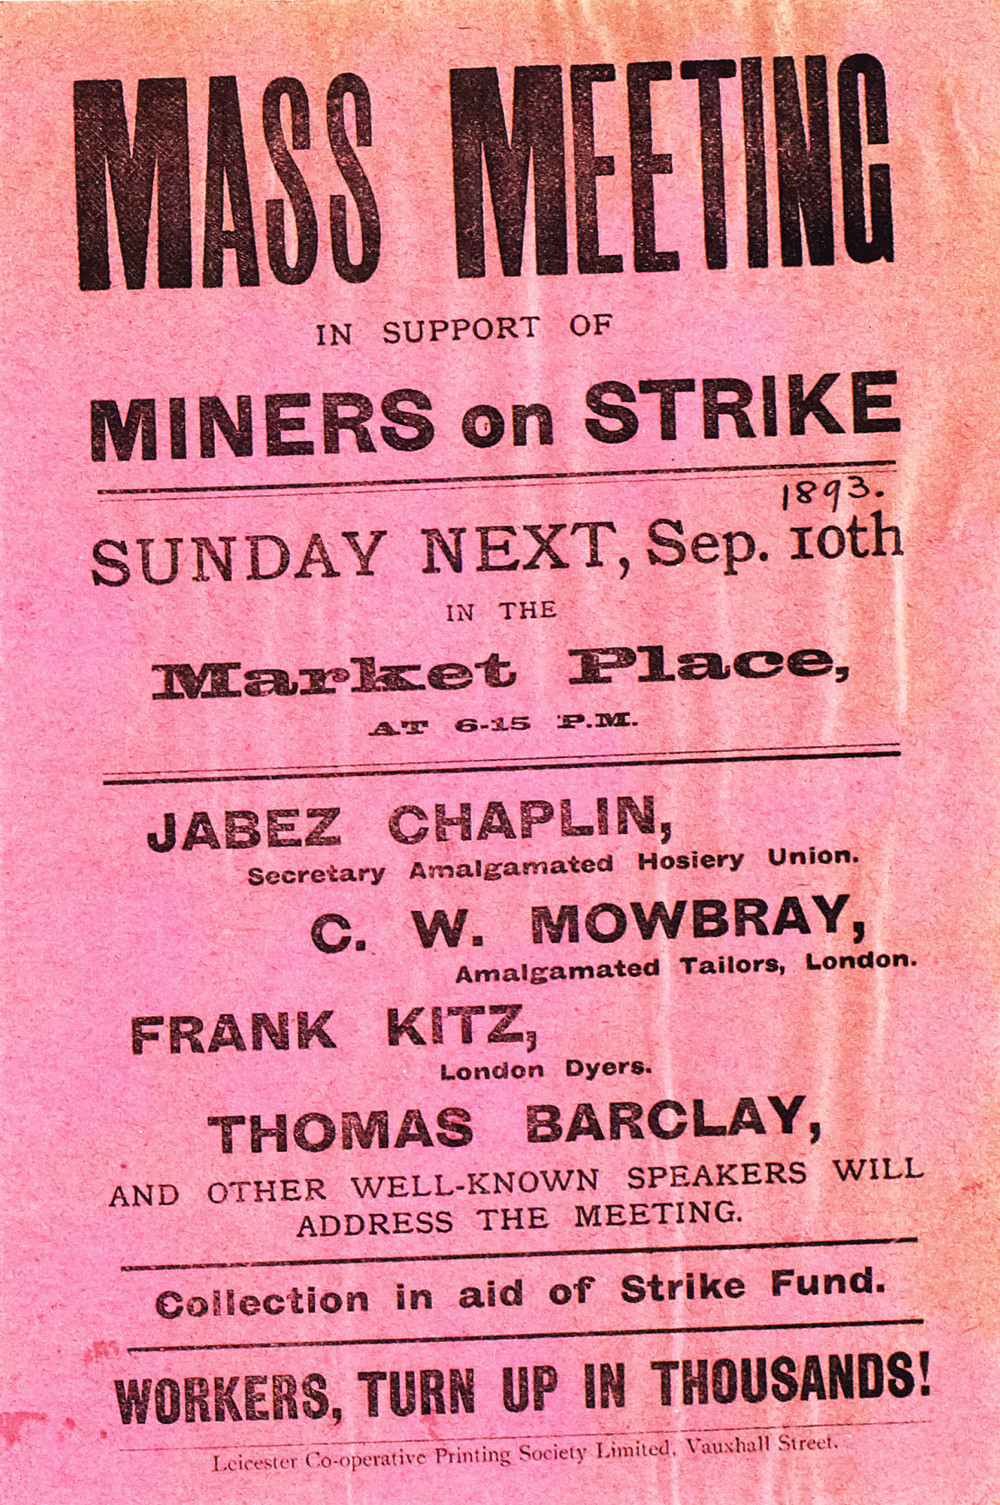 Poster advertising a meeting in support of miners on strike, featuring Thomas Barclay as a speaker, 1893. Courtesy of Gorrie Collection, University of Leicester Special Collections Online, specialcollections.le.ac.uk